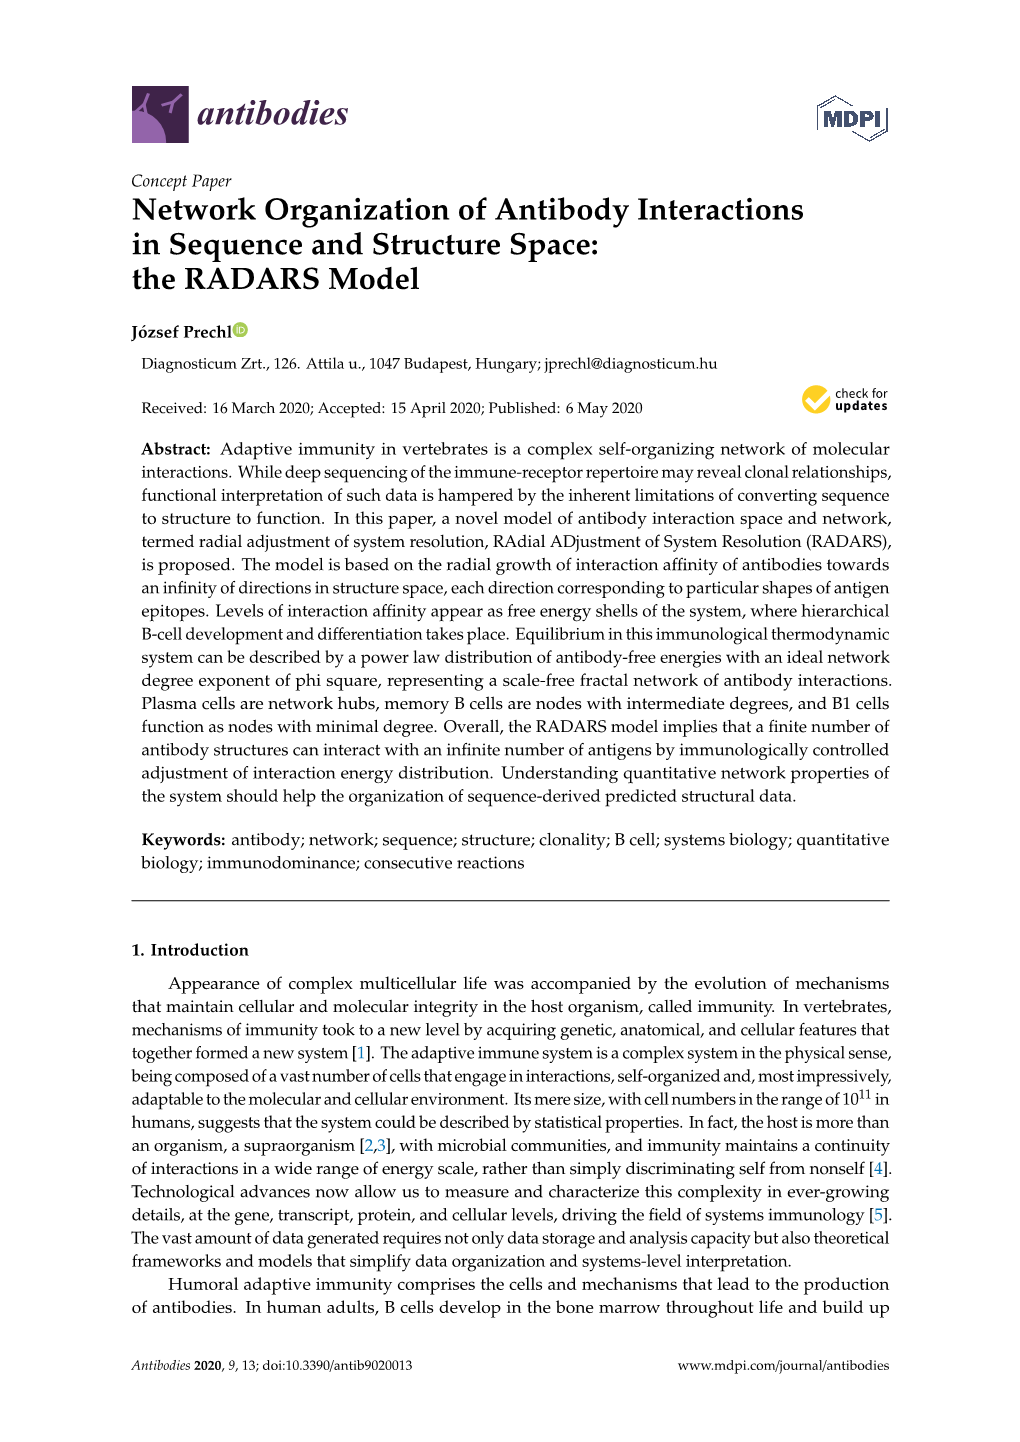 Network Organization of Antibody Interactions in Sequence and Structure Space: the RADARS Model